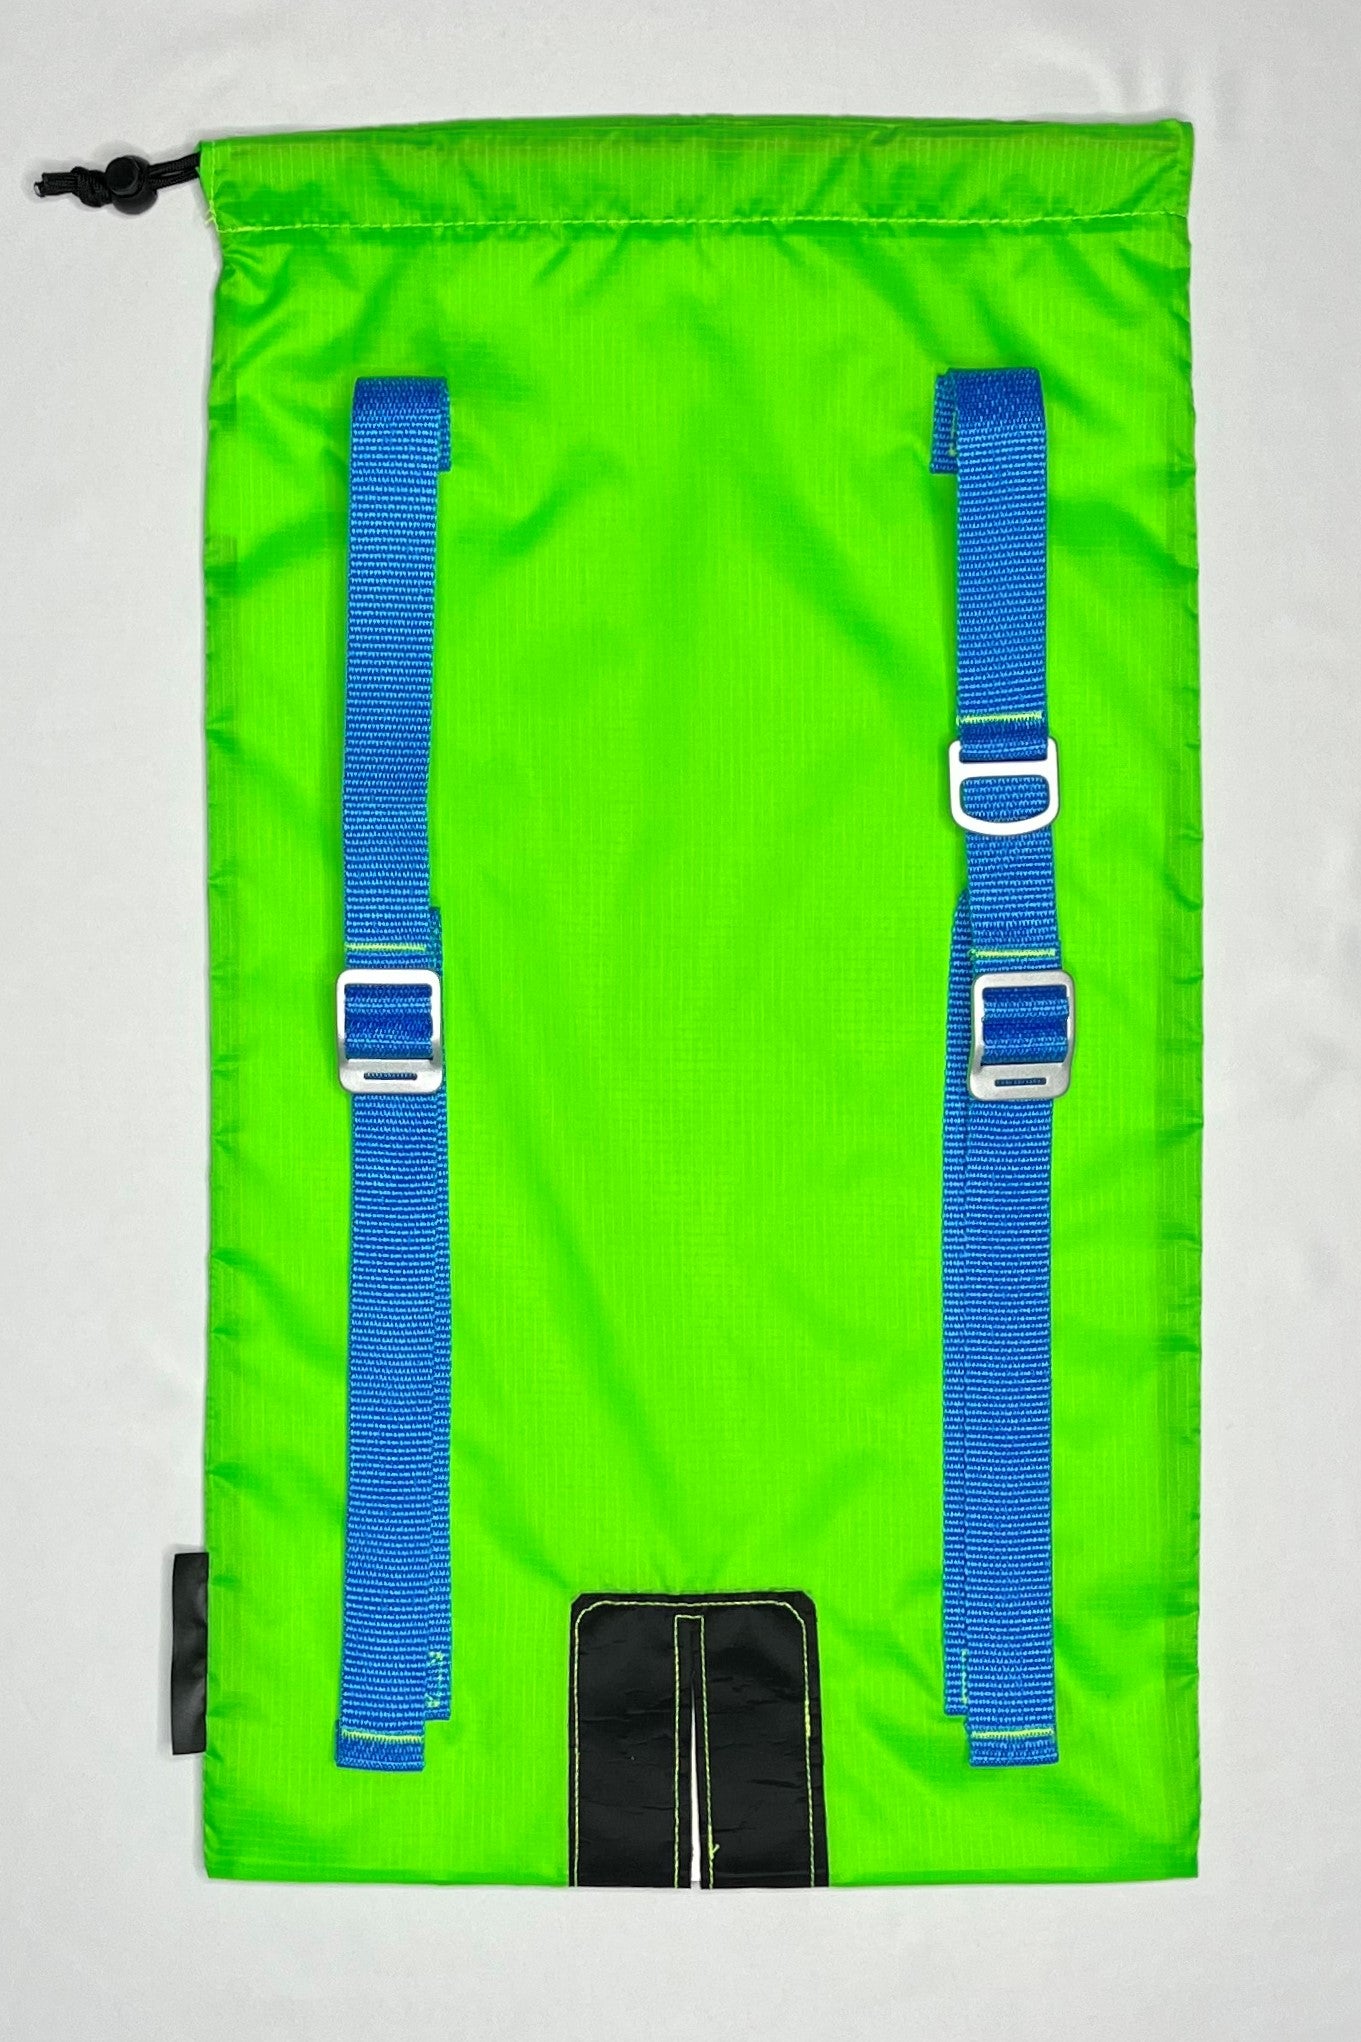 Back image of the Neon Green Ski Pack with blue straps and aluminum strap adjusters and d-ring